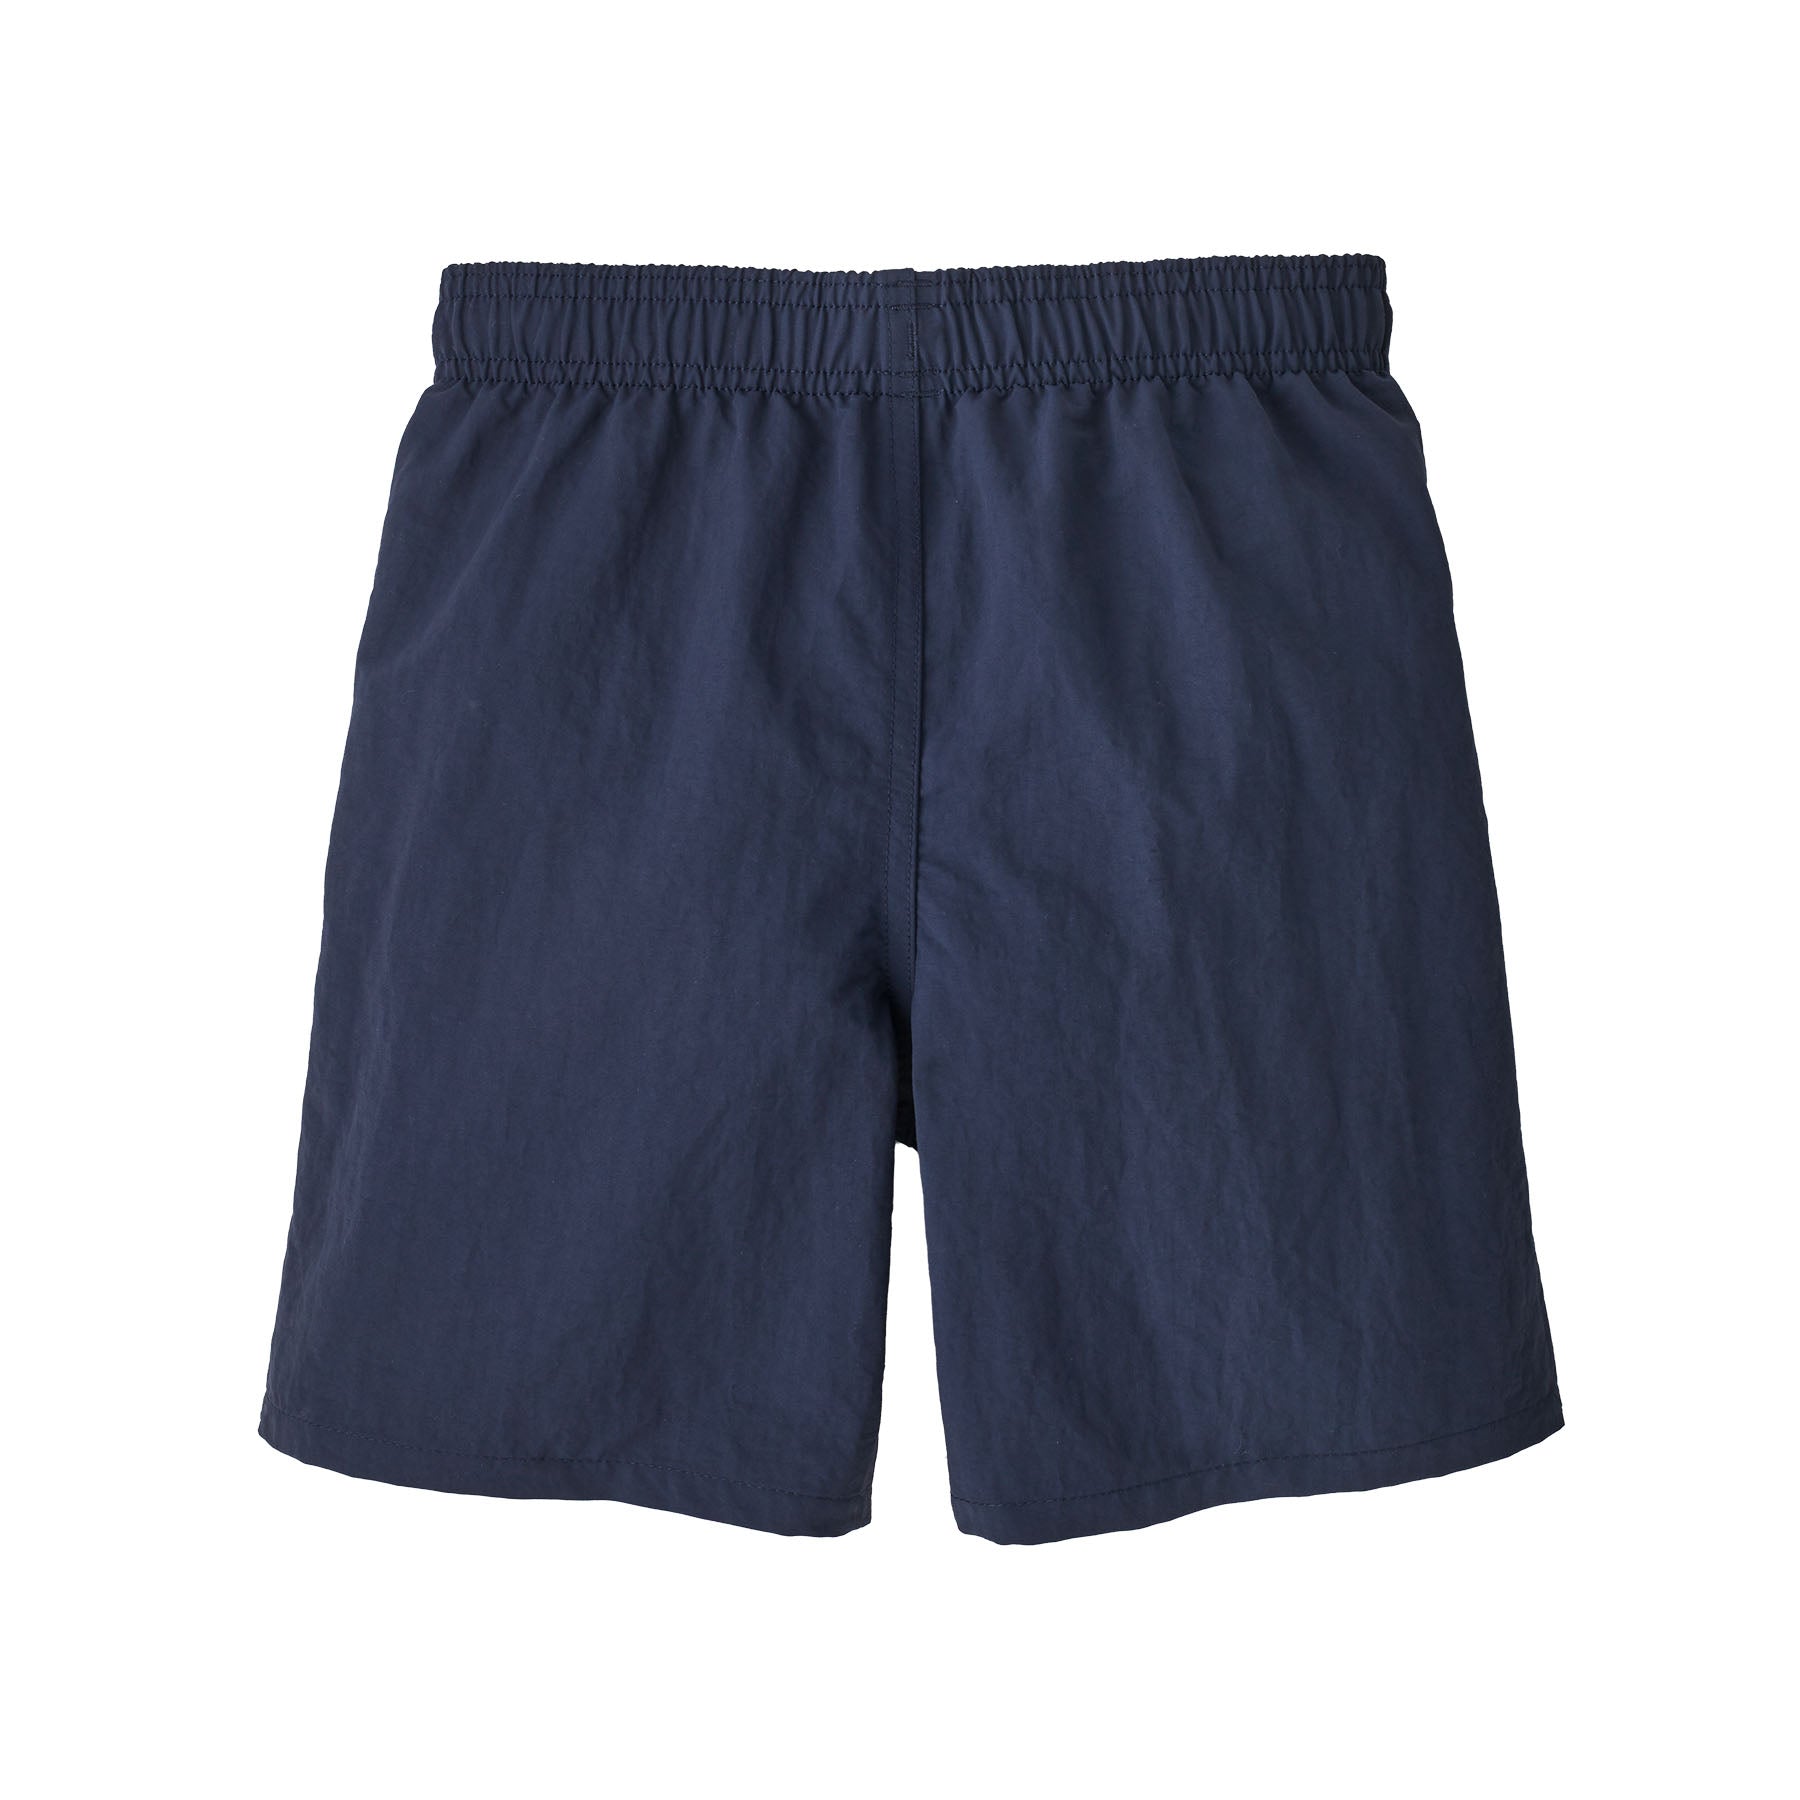 Kids' Baggies™ Shorts 5 in. - Lined